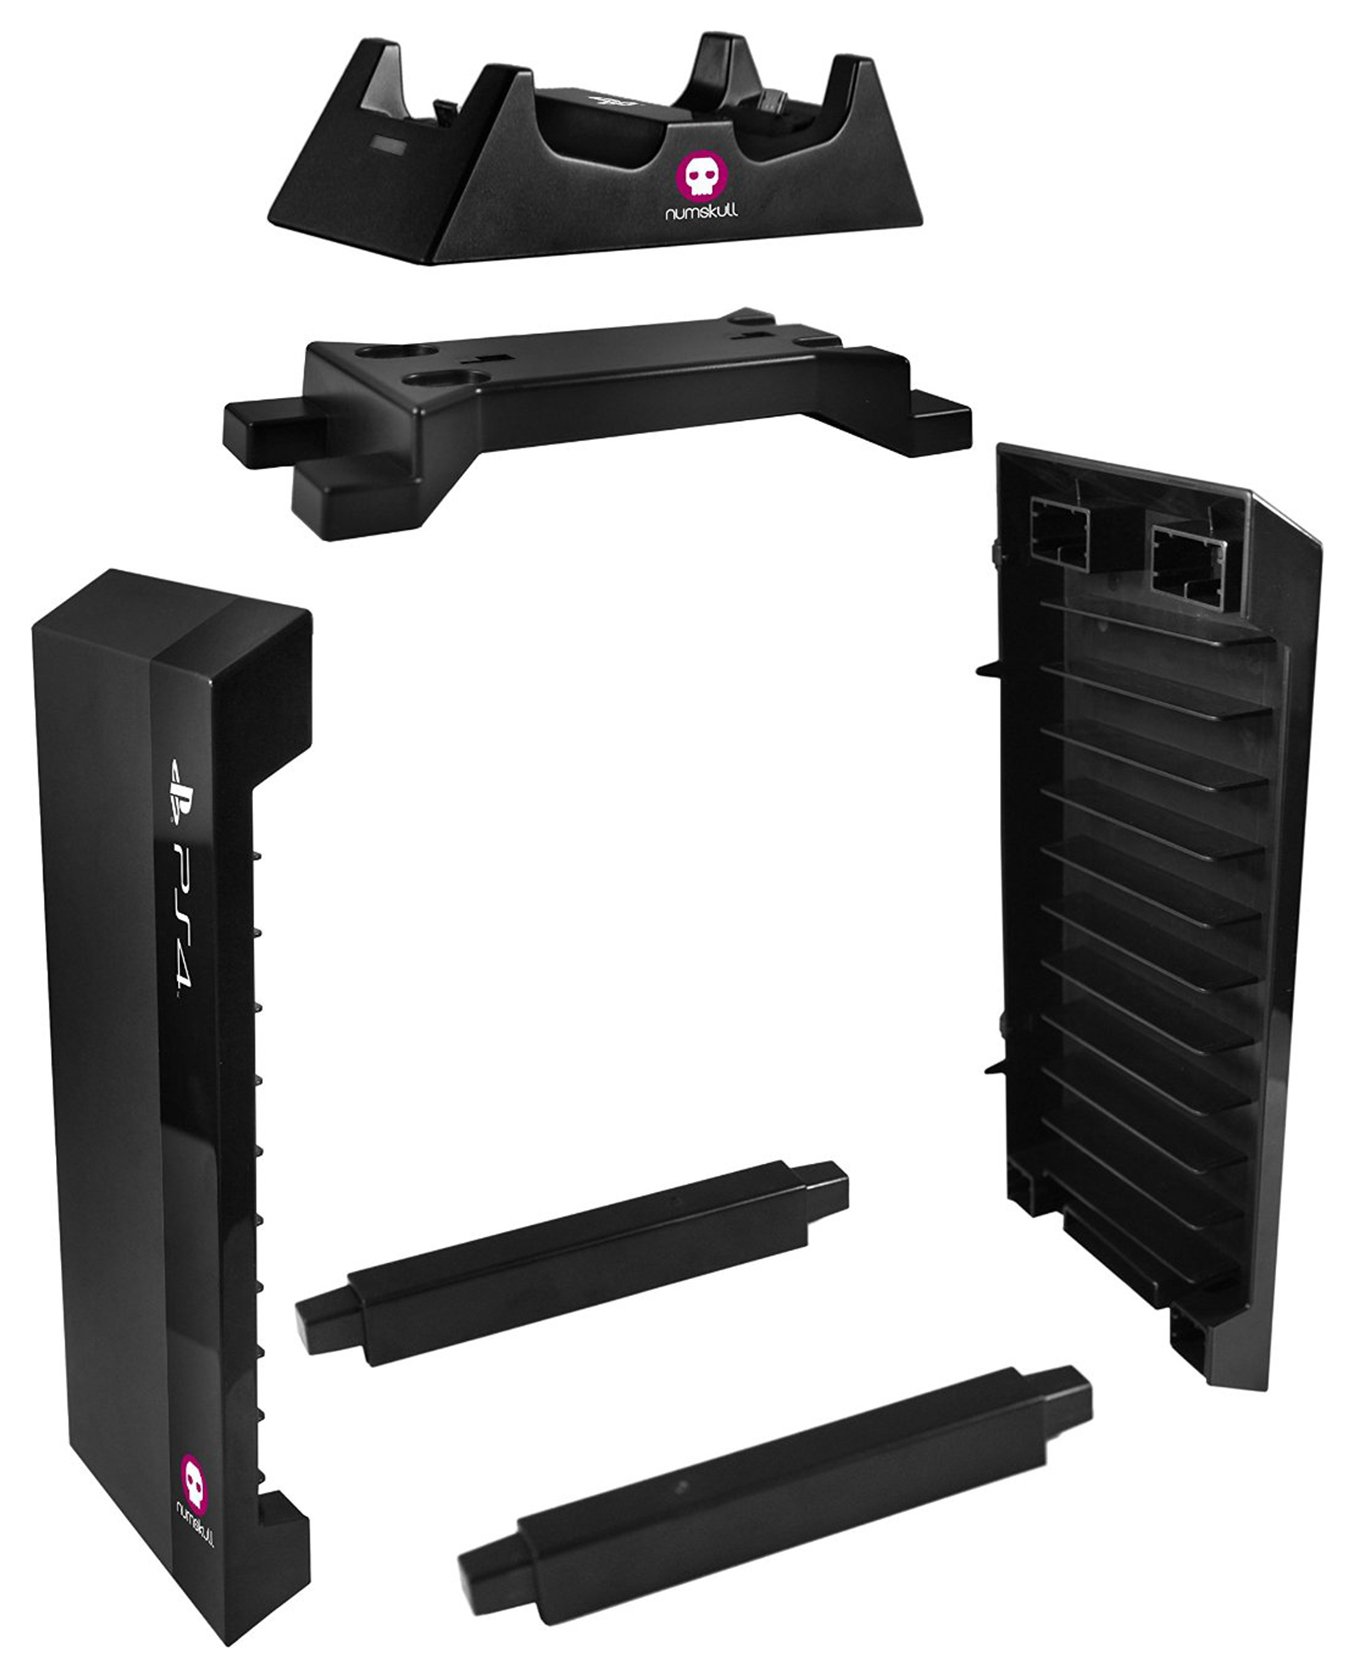 Sony Official Games Tower and Charging Station for PS4 Review